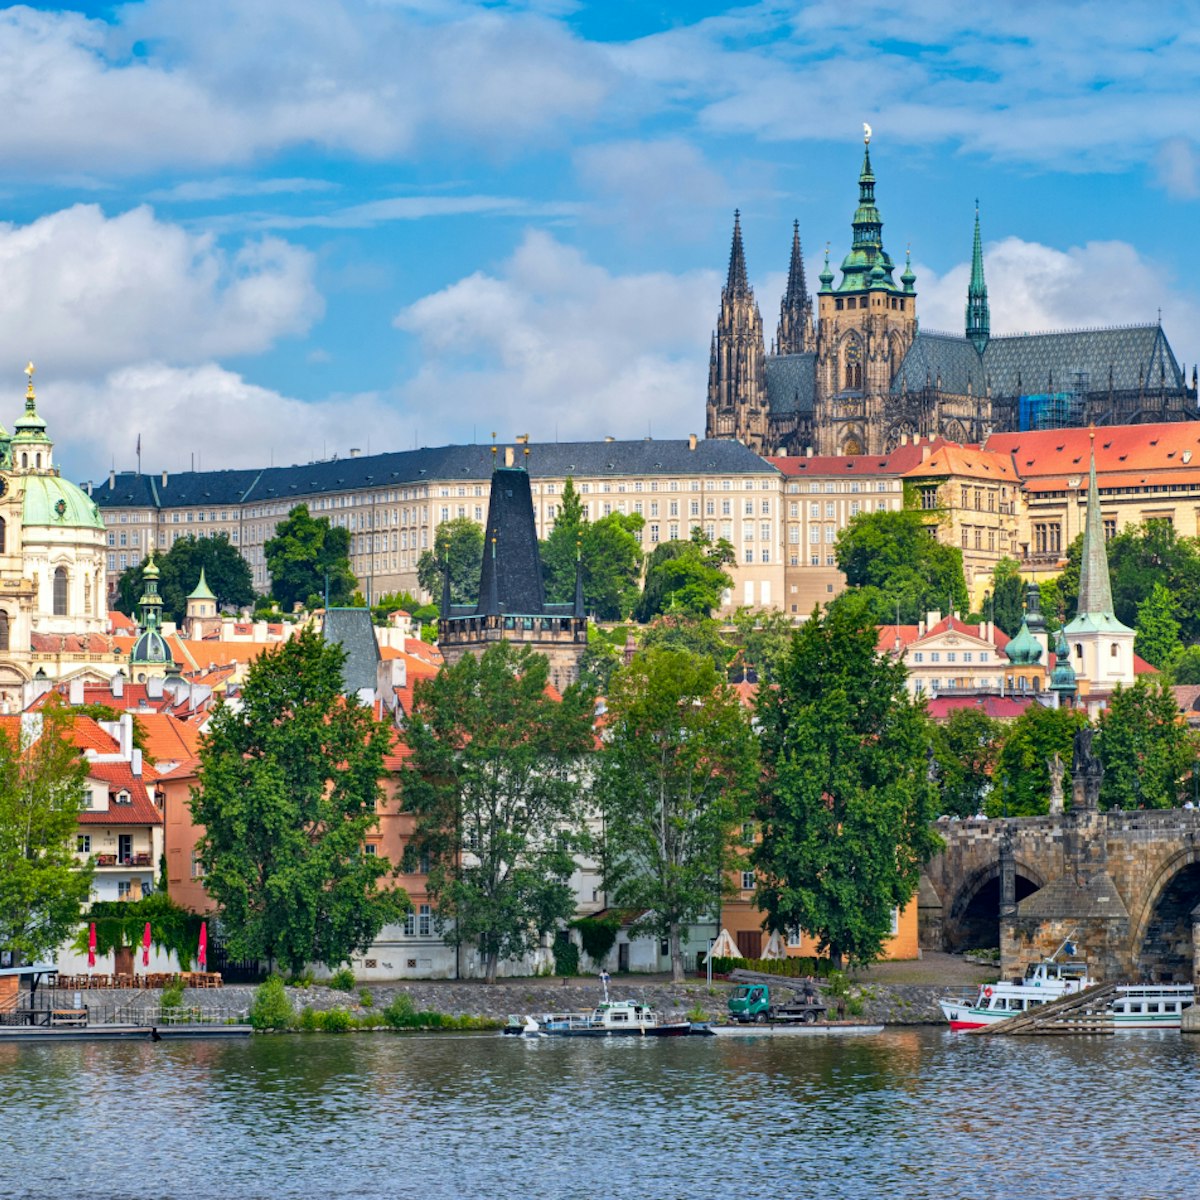 View of Prague castle and Charles Bridge; Shutterstock ID 83097769; Your name (First / Last): Gemma Graham; GL account no.: 65050; Netsuite department name: Online Editorial; Full Product or Project name including edition: POI imagery for LP.com